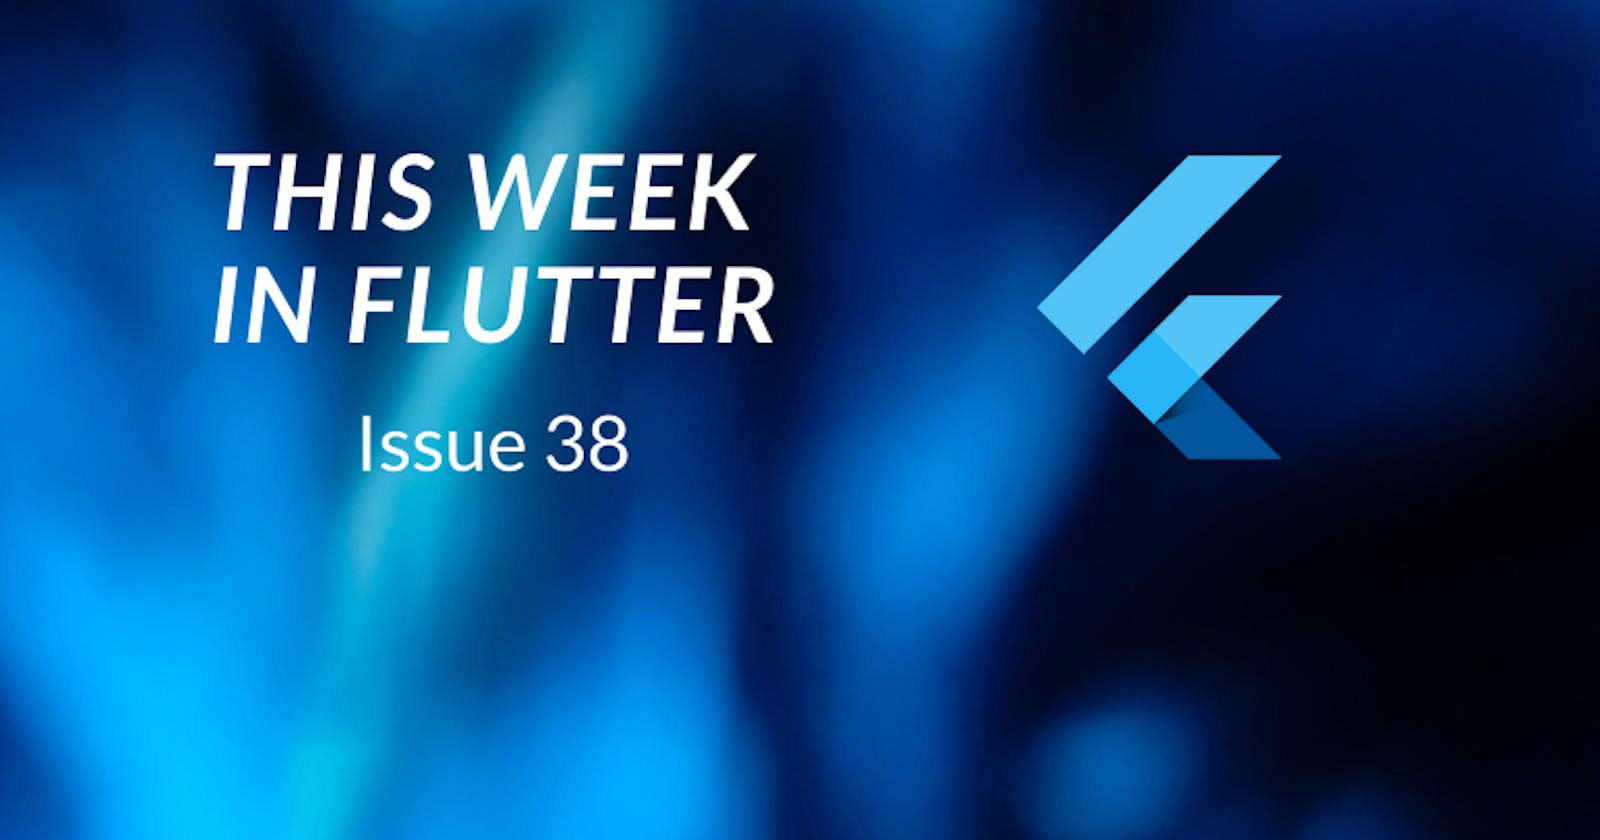 This week in Flutter #38